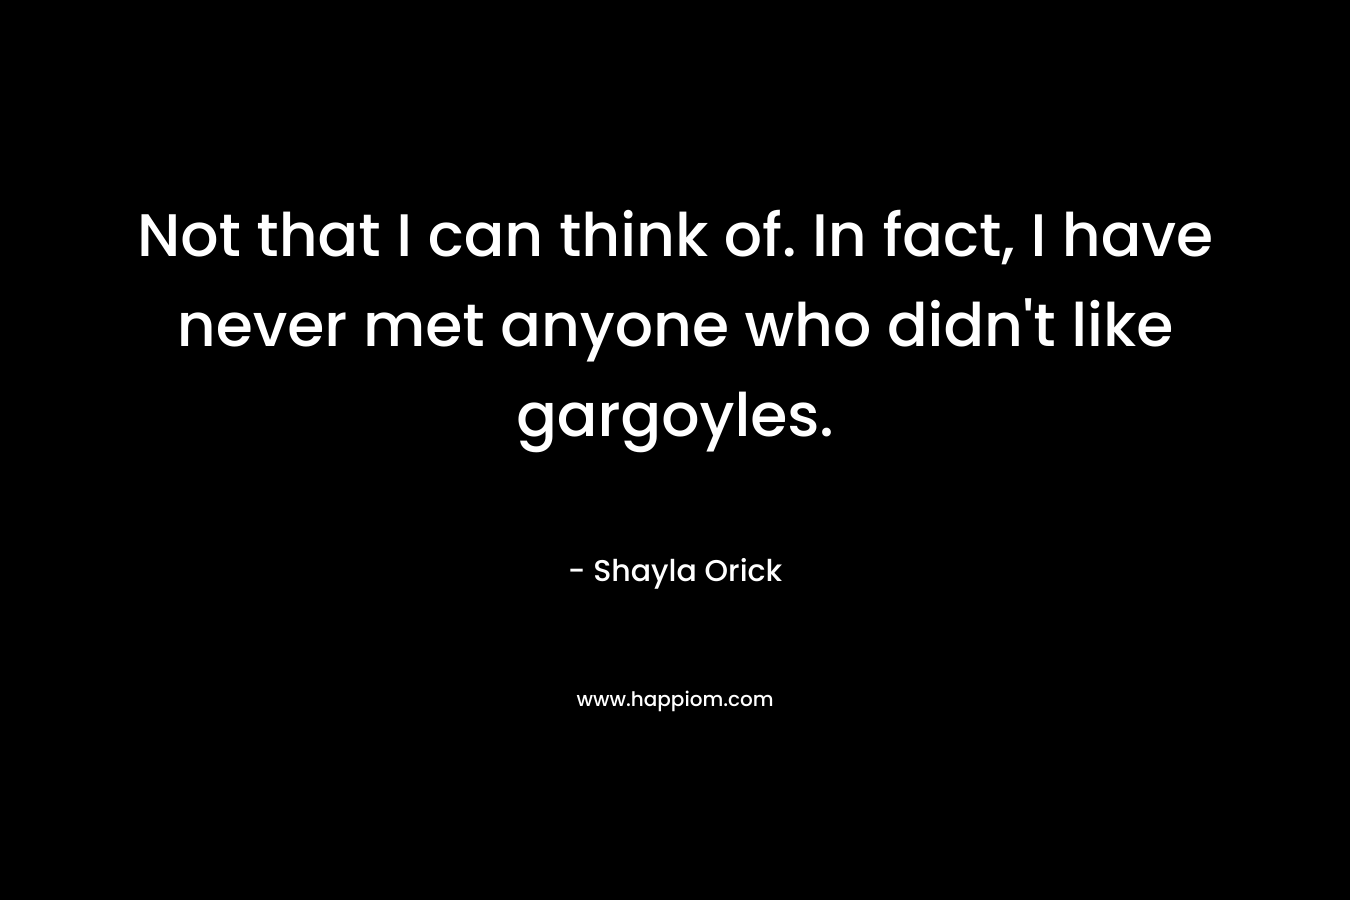 Not that I can think of. In fact, I have never met anyone who didn't like gargoyles.